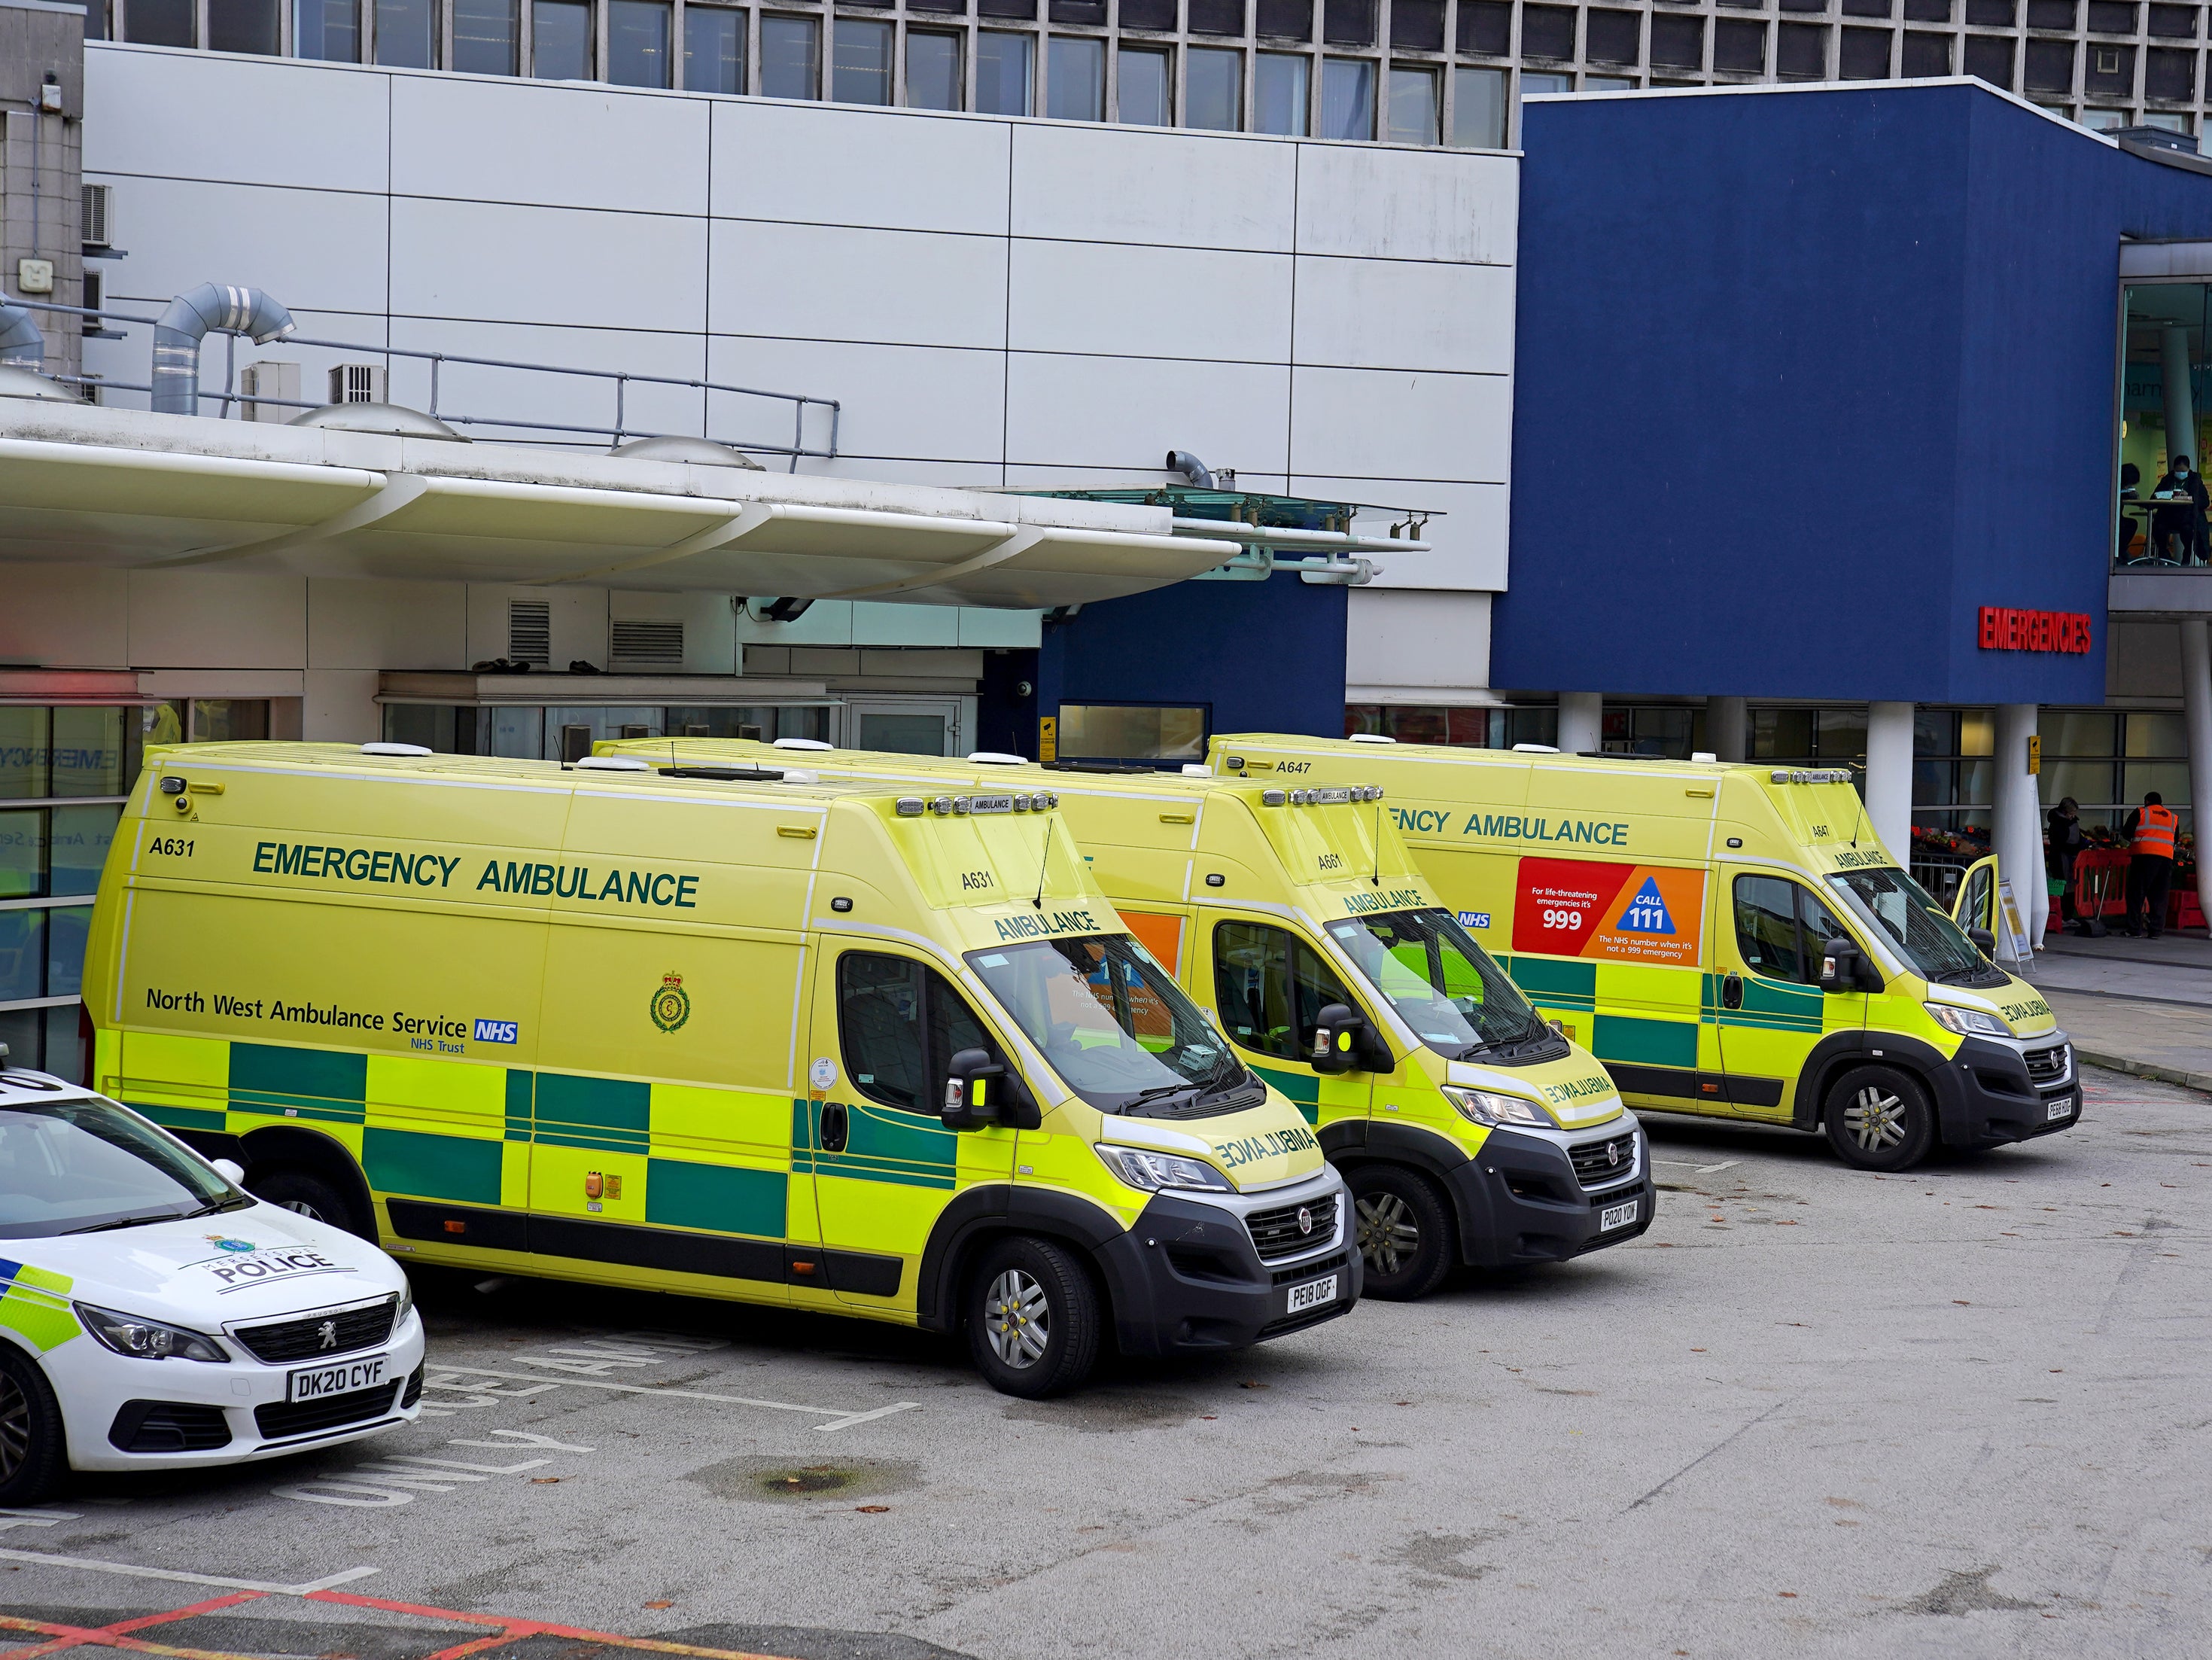 Increasing pressure in the NHS, resulting in long waiting times, is prompting some patients to lash out, paramedics warn